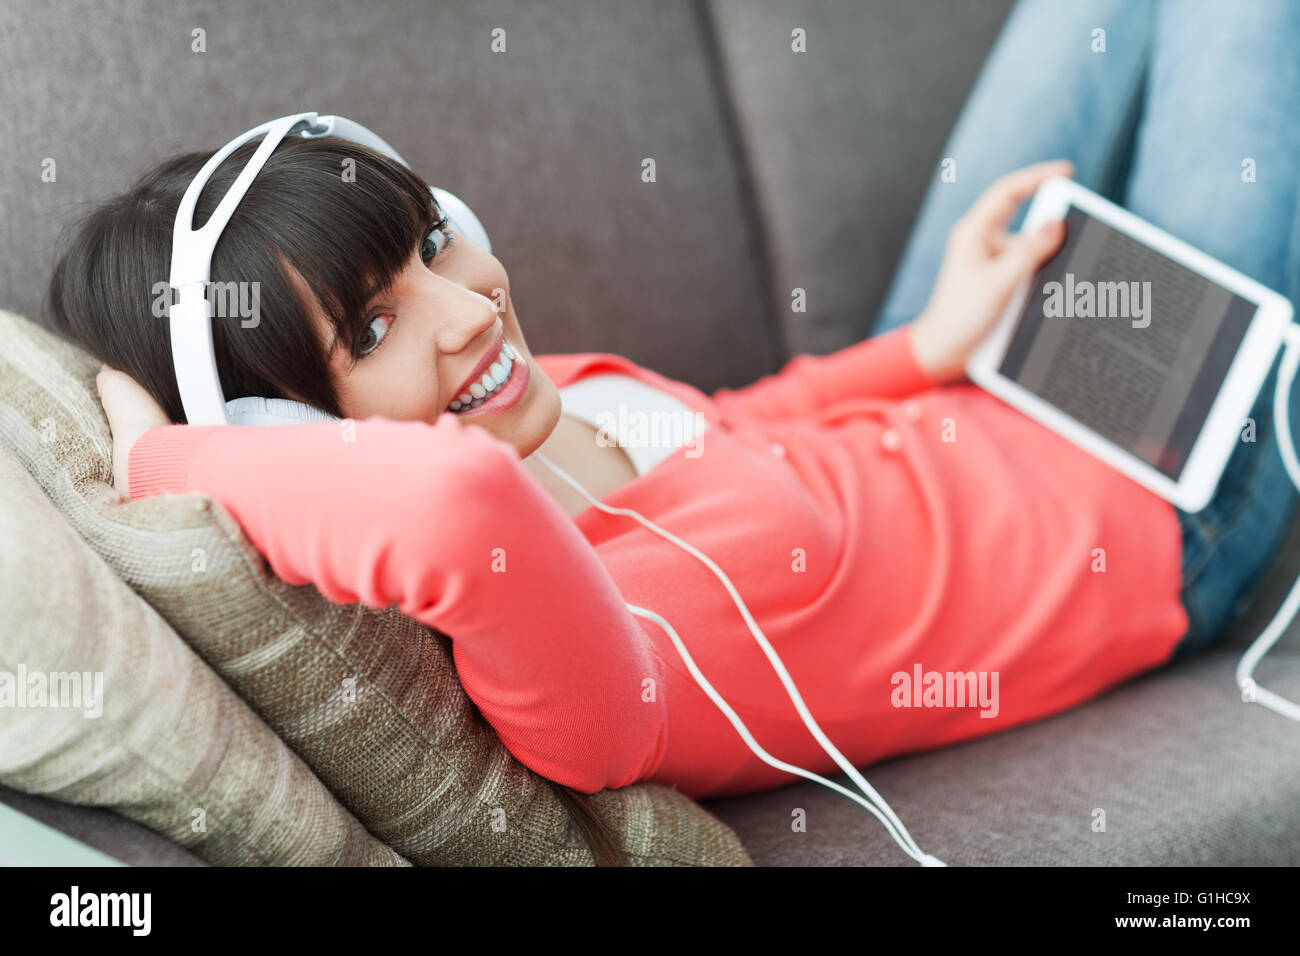 Smiling young woman relaxing at home on the couch, she is wearing headphones, using a digital tablet and watching a video online Stock Photo